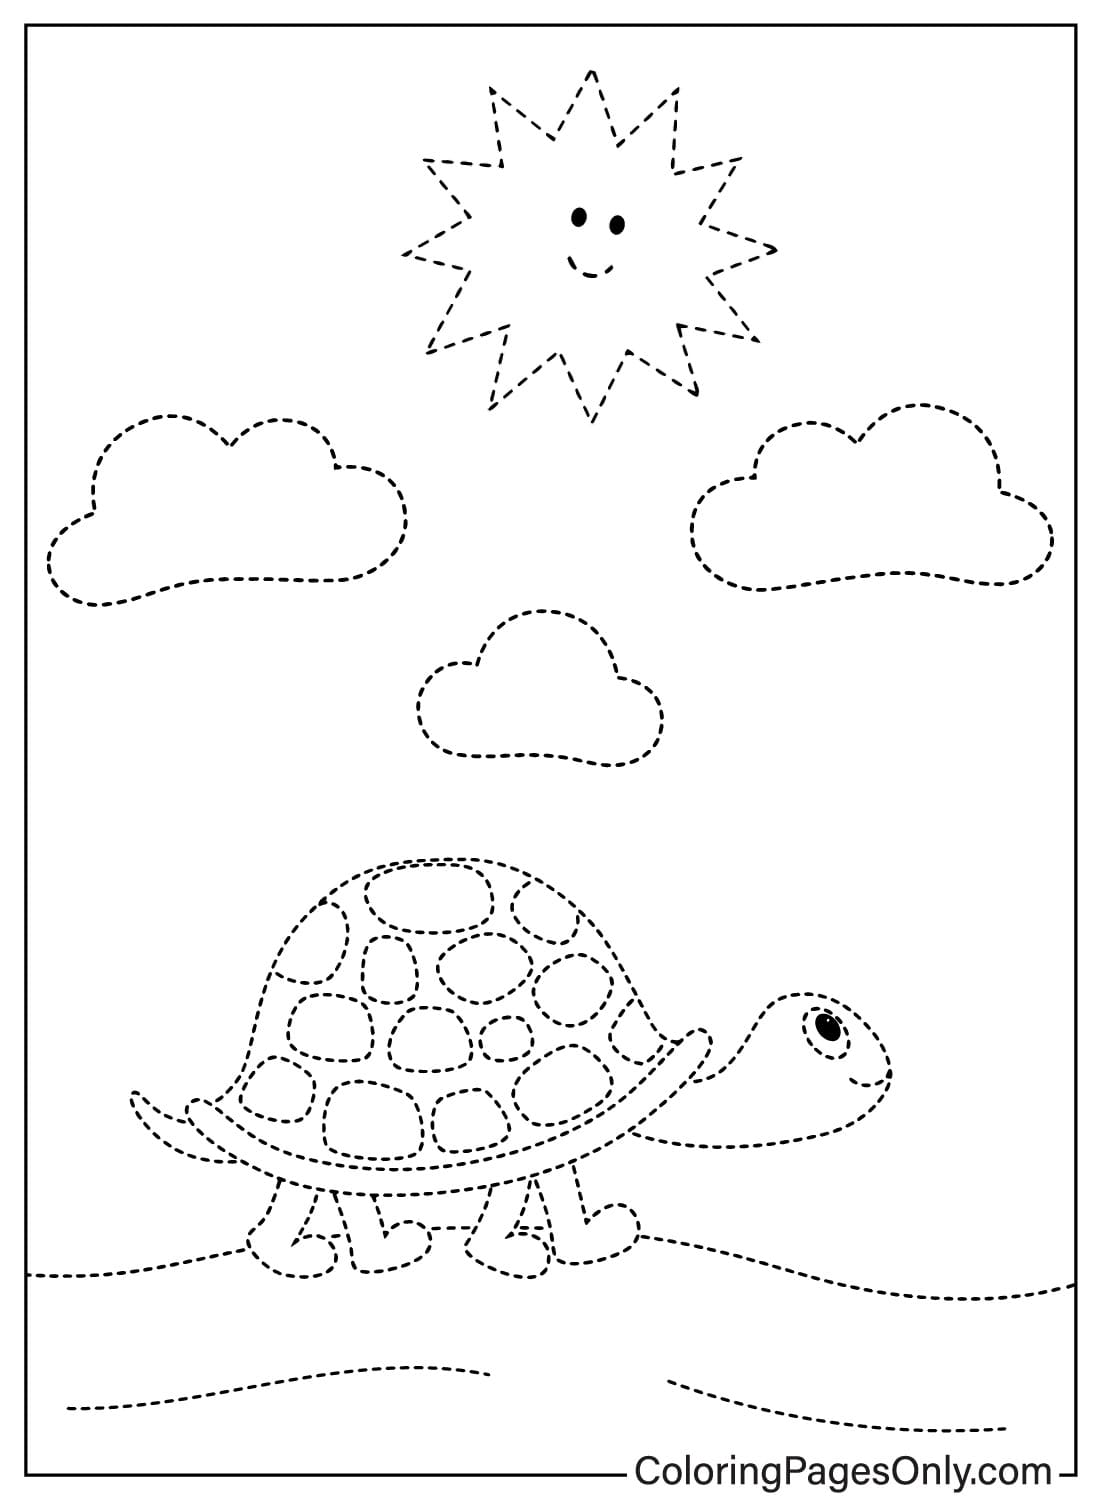 Free Printable Tracing Coloring Page from Tracing